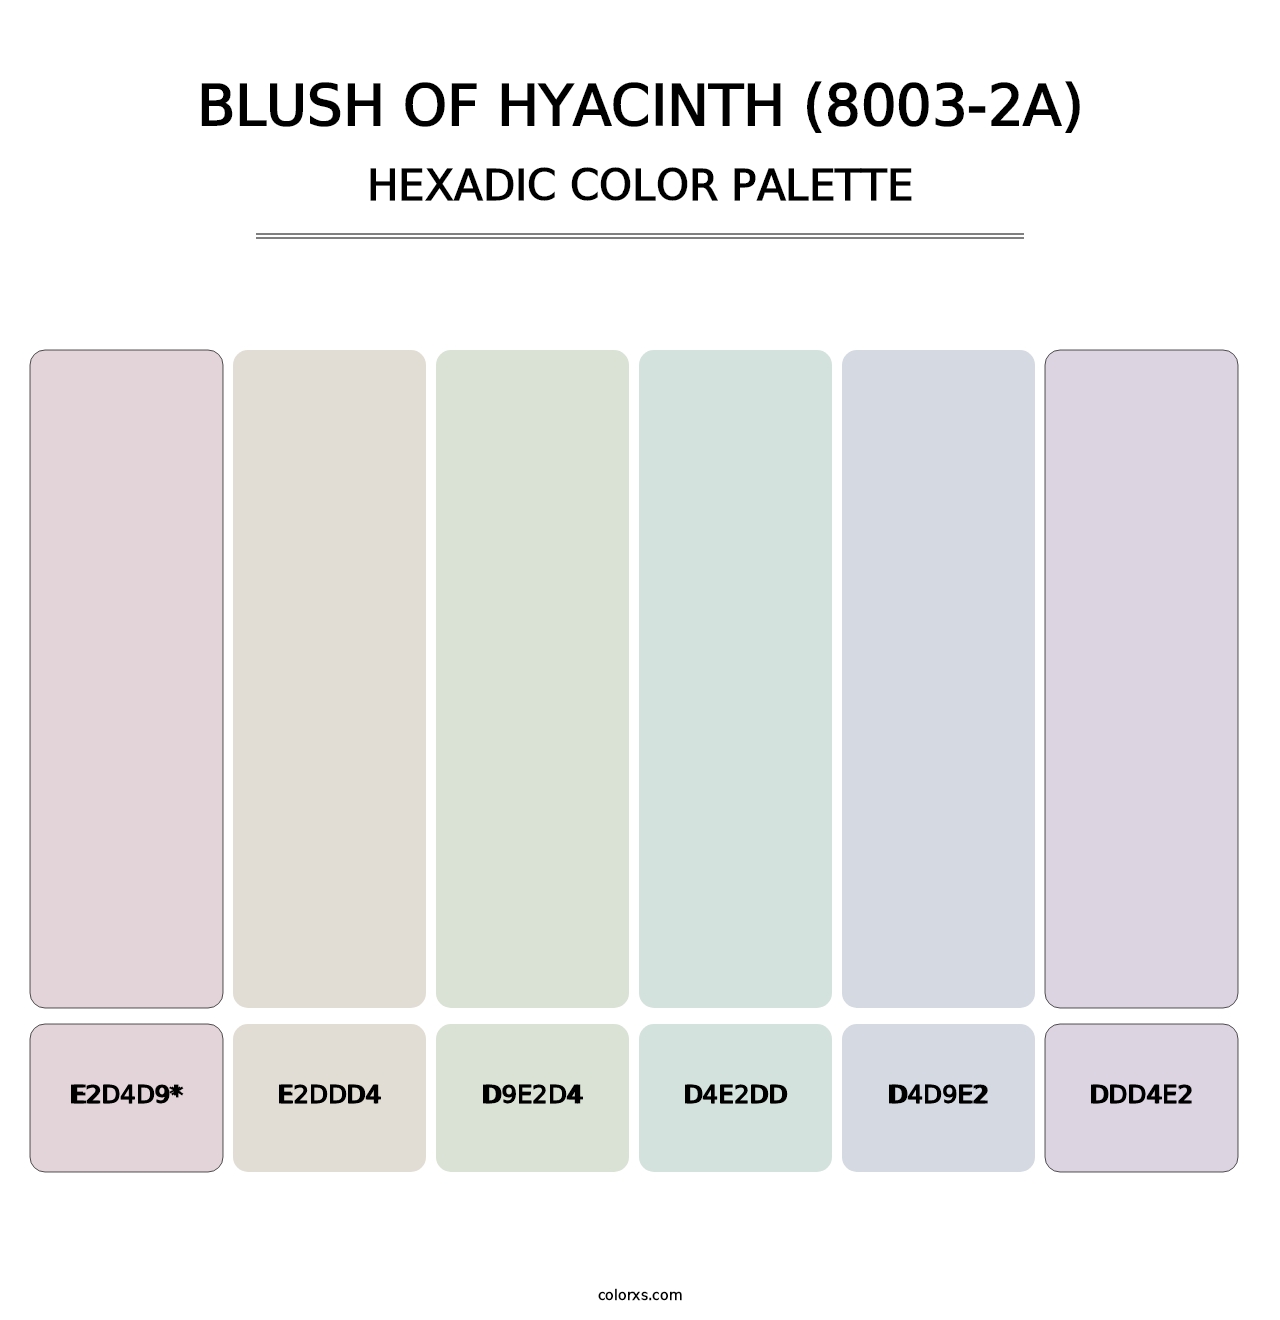 Blush of Hyacinth (8003-2A) - Hexadic Color Palette